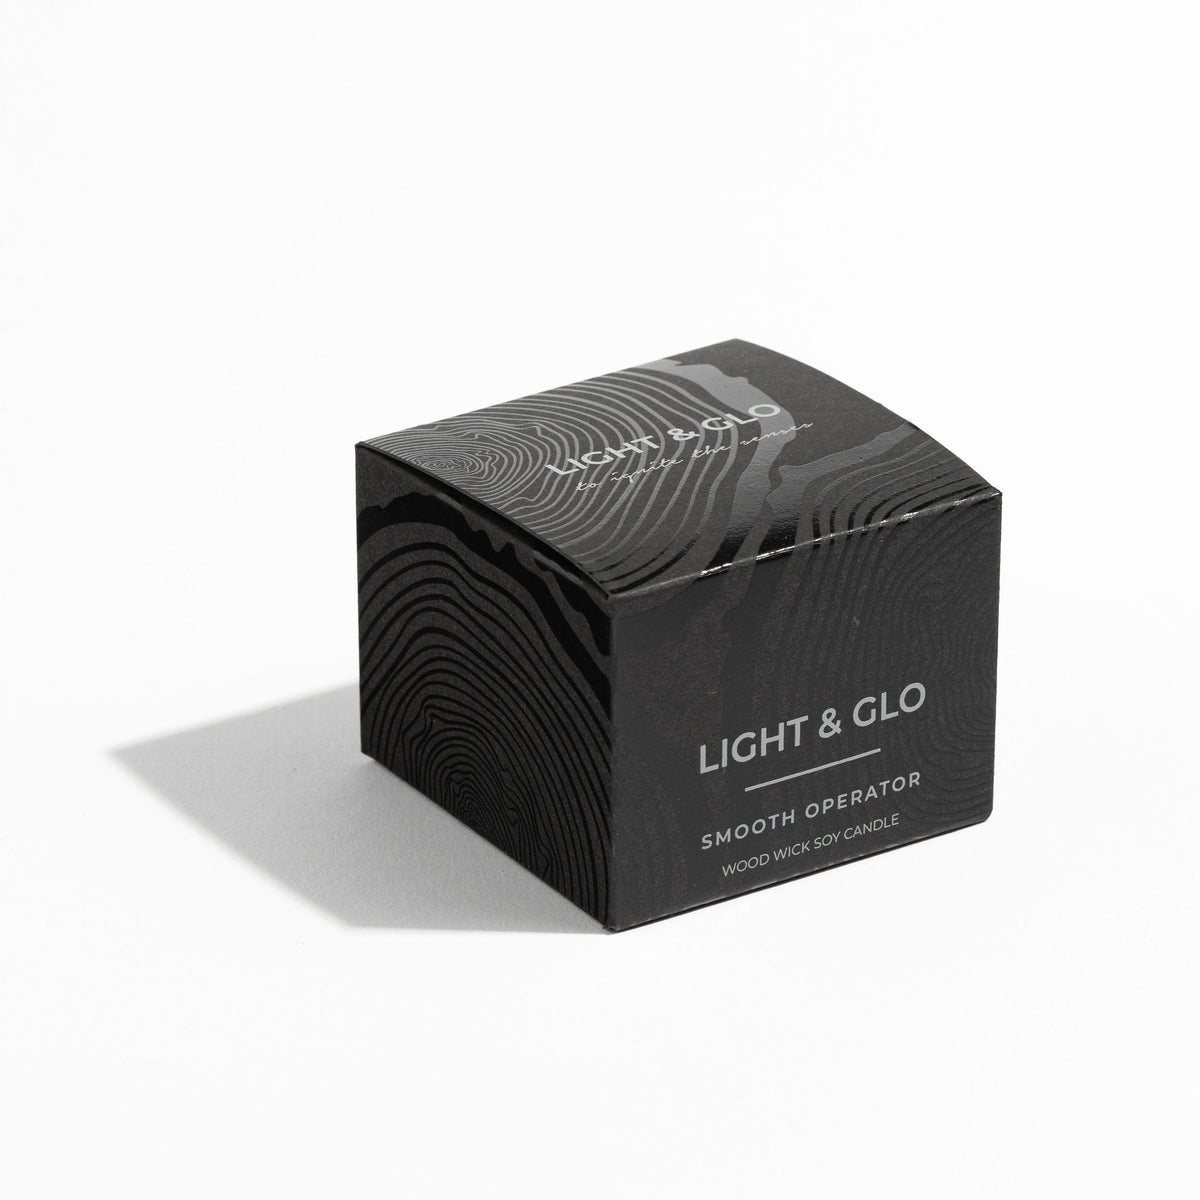 Smooth Operator - Noir Travel Candle | Luxury Candles &amp; Home Fragrances by Light + Glo